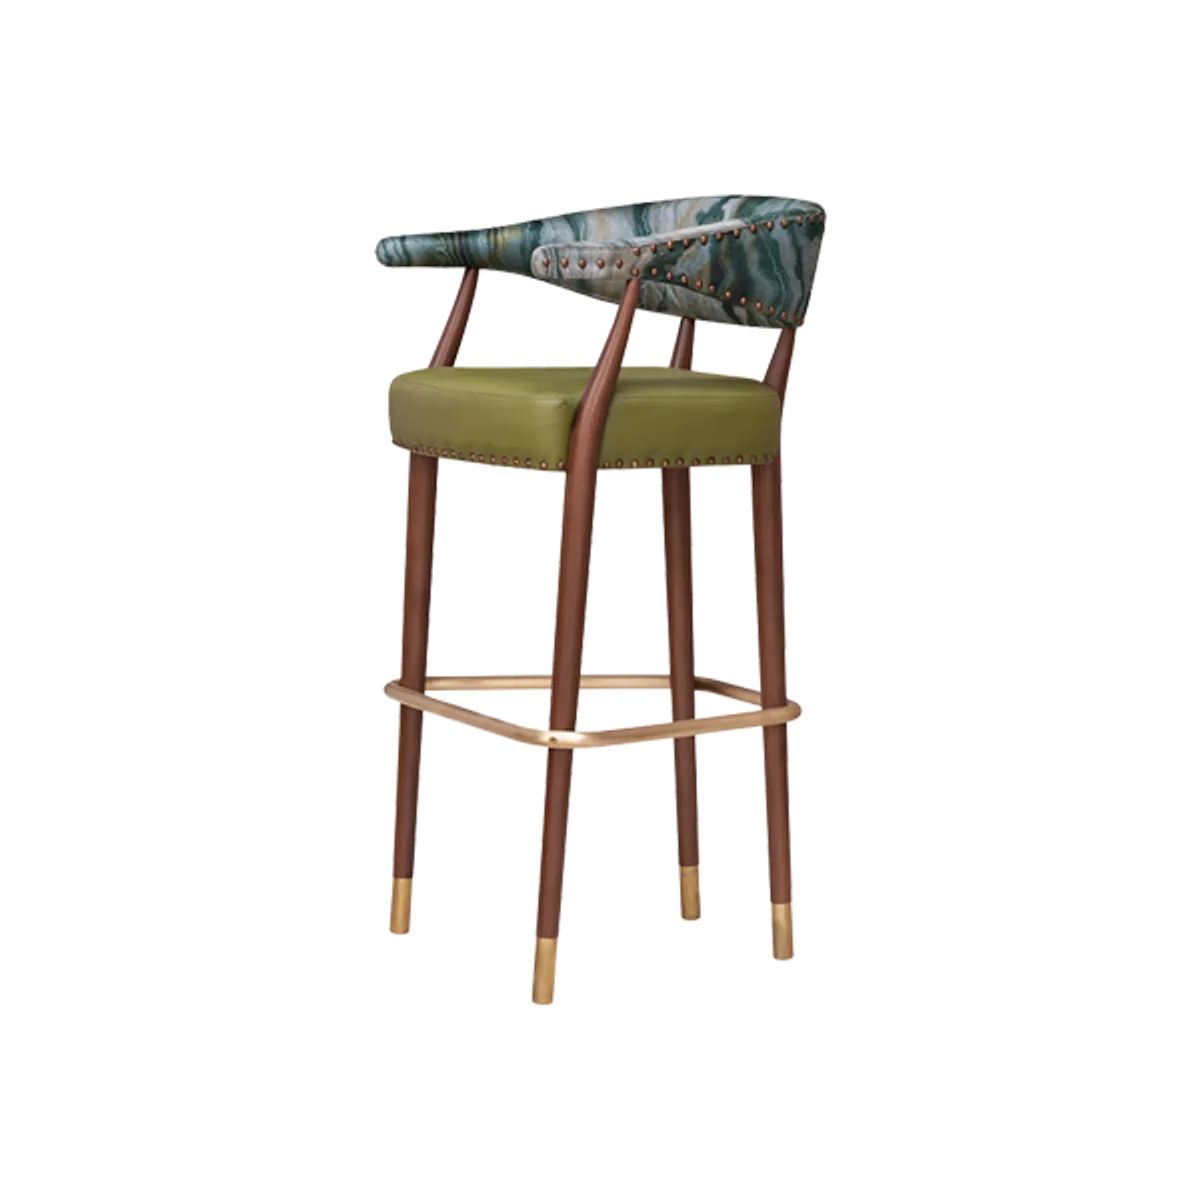 Web Clara Bar Stool Furniture For Bars With Stud Detailing And Metal Slipper Cups On Wooden Legs 0985